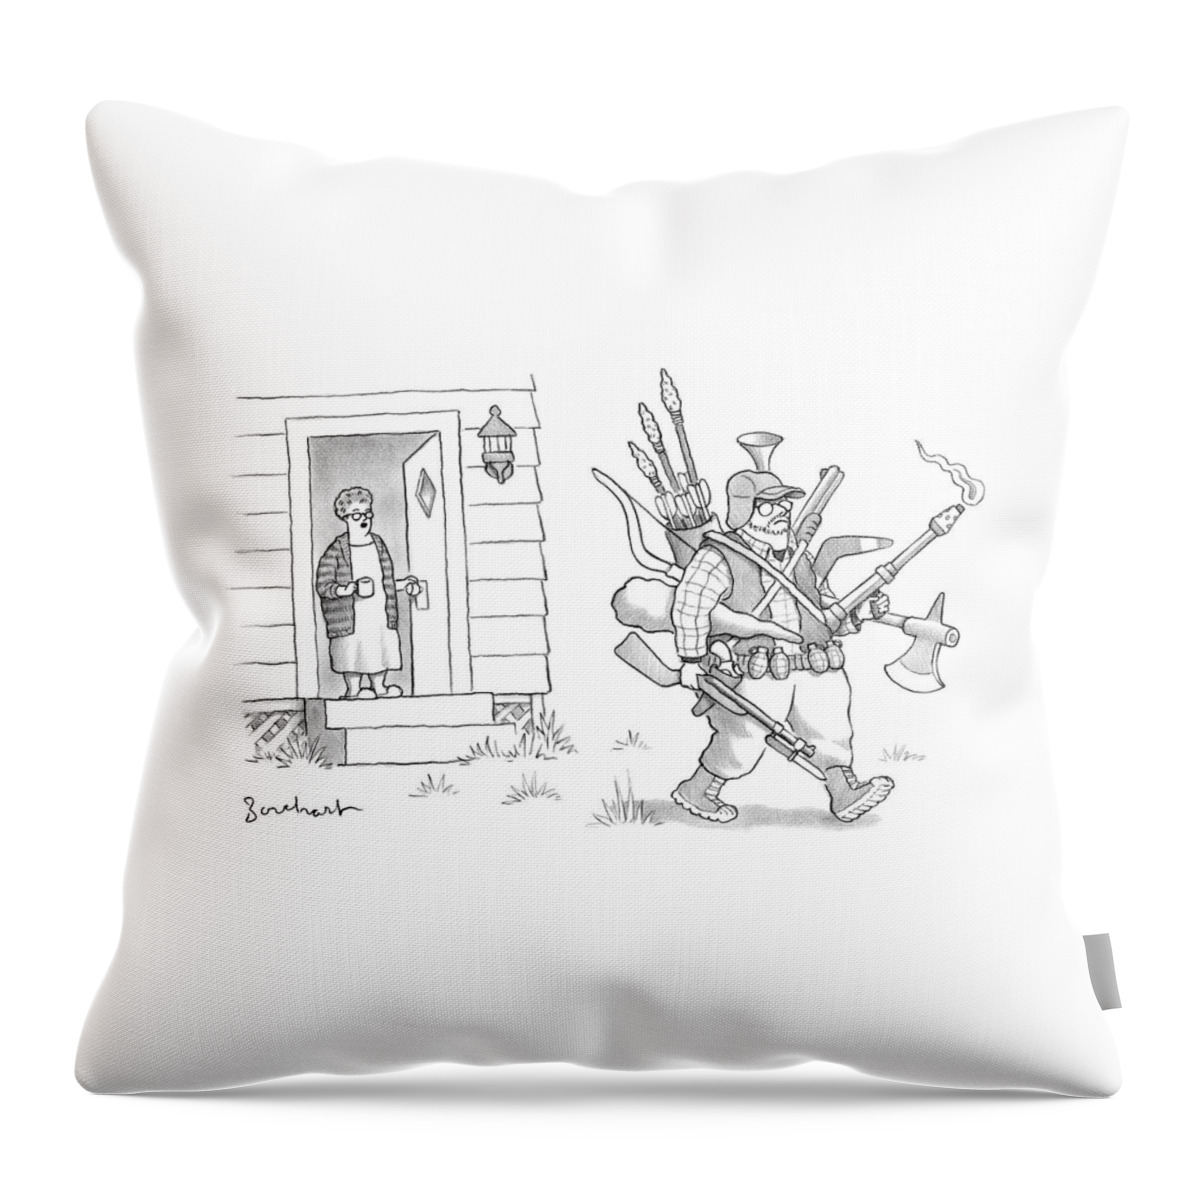 An Elderly Woman Calls Out From The Front Door #1 Throw Pillow